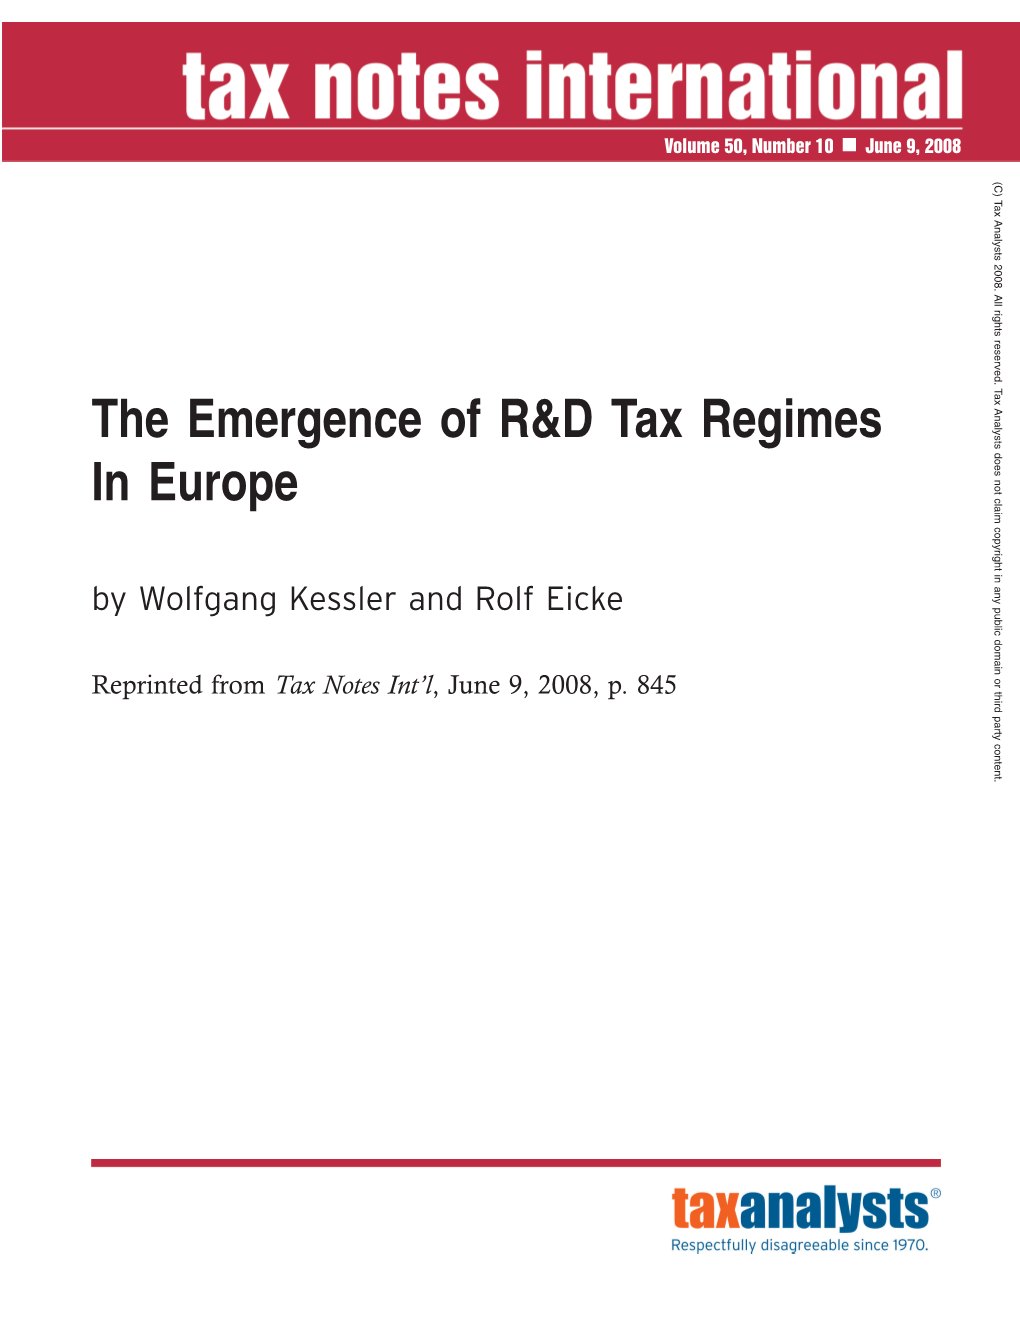 The Emergence of R&D Tax Regimes in Europe